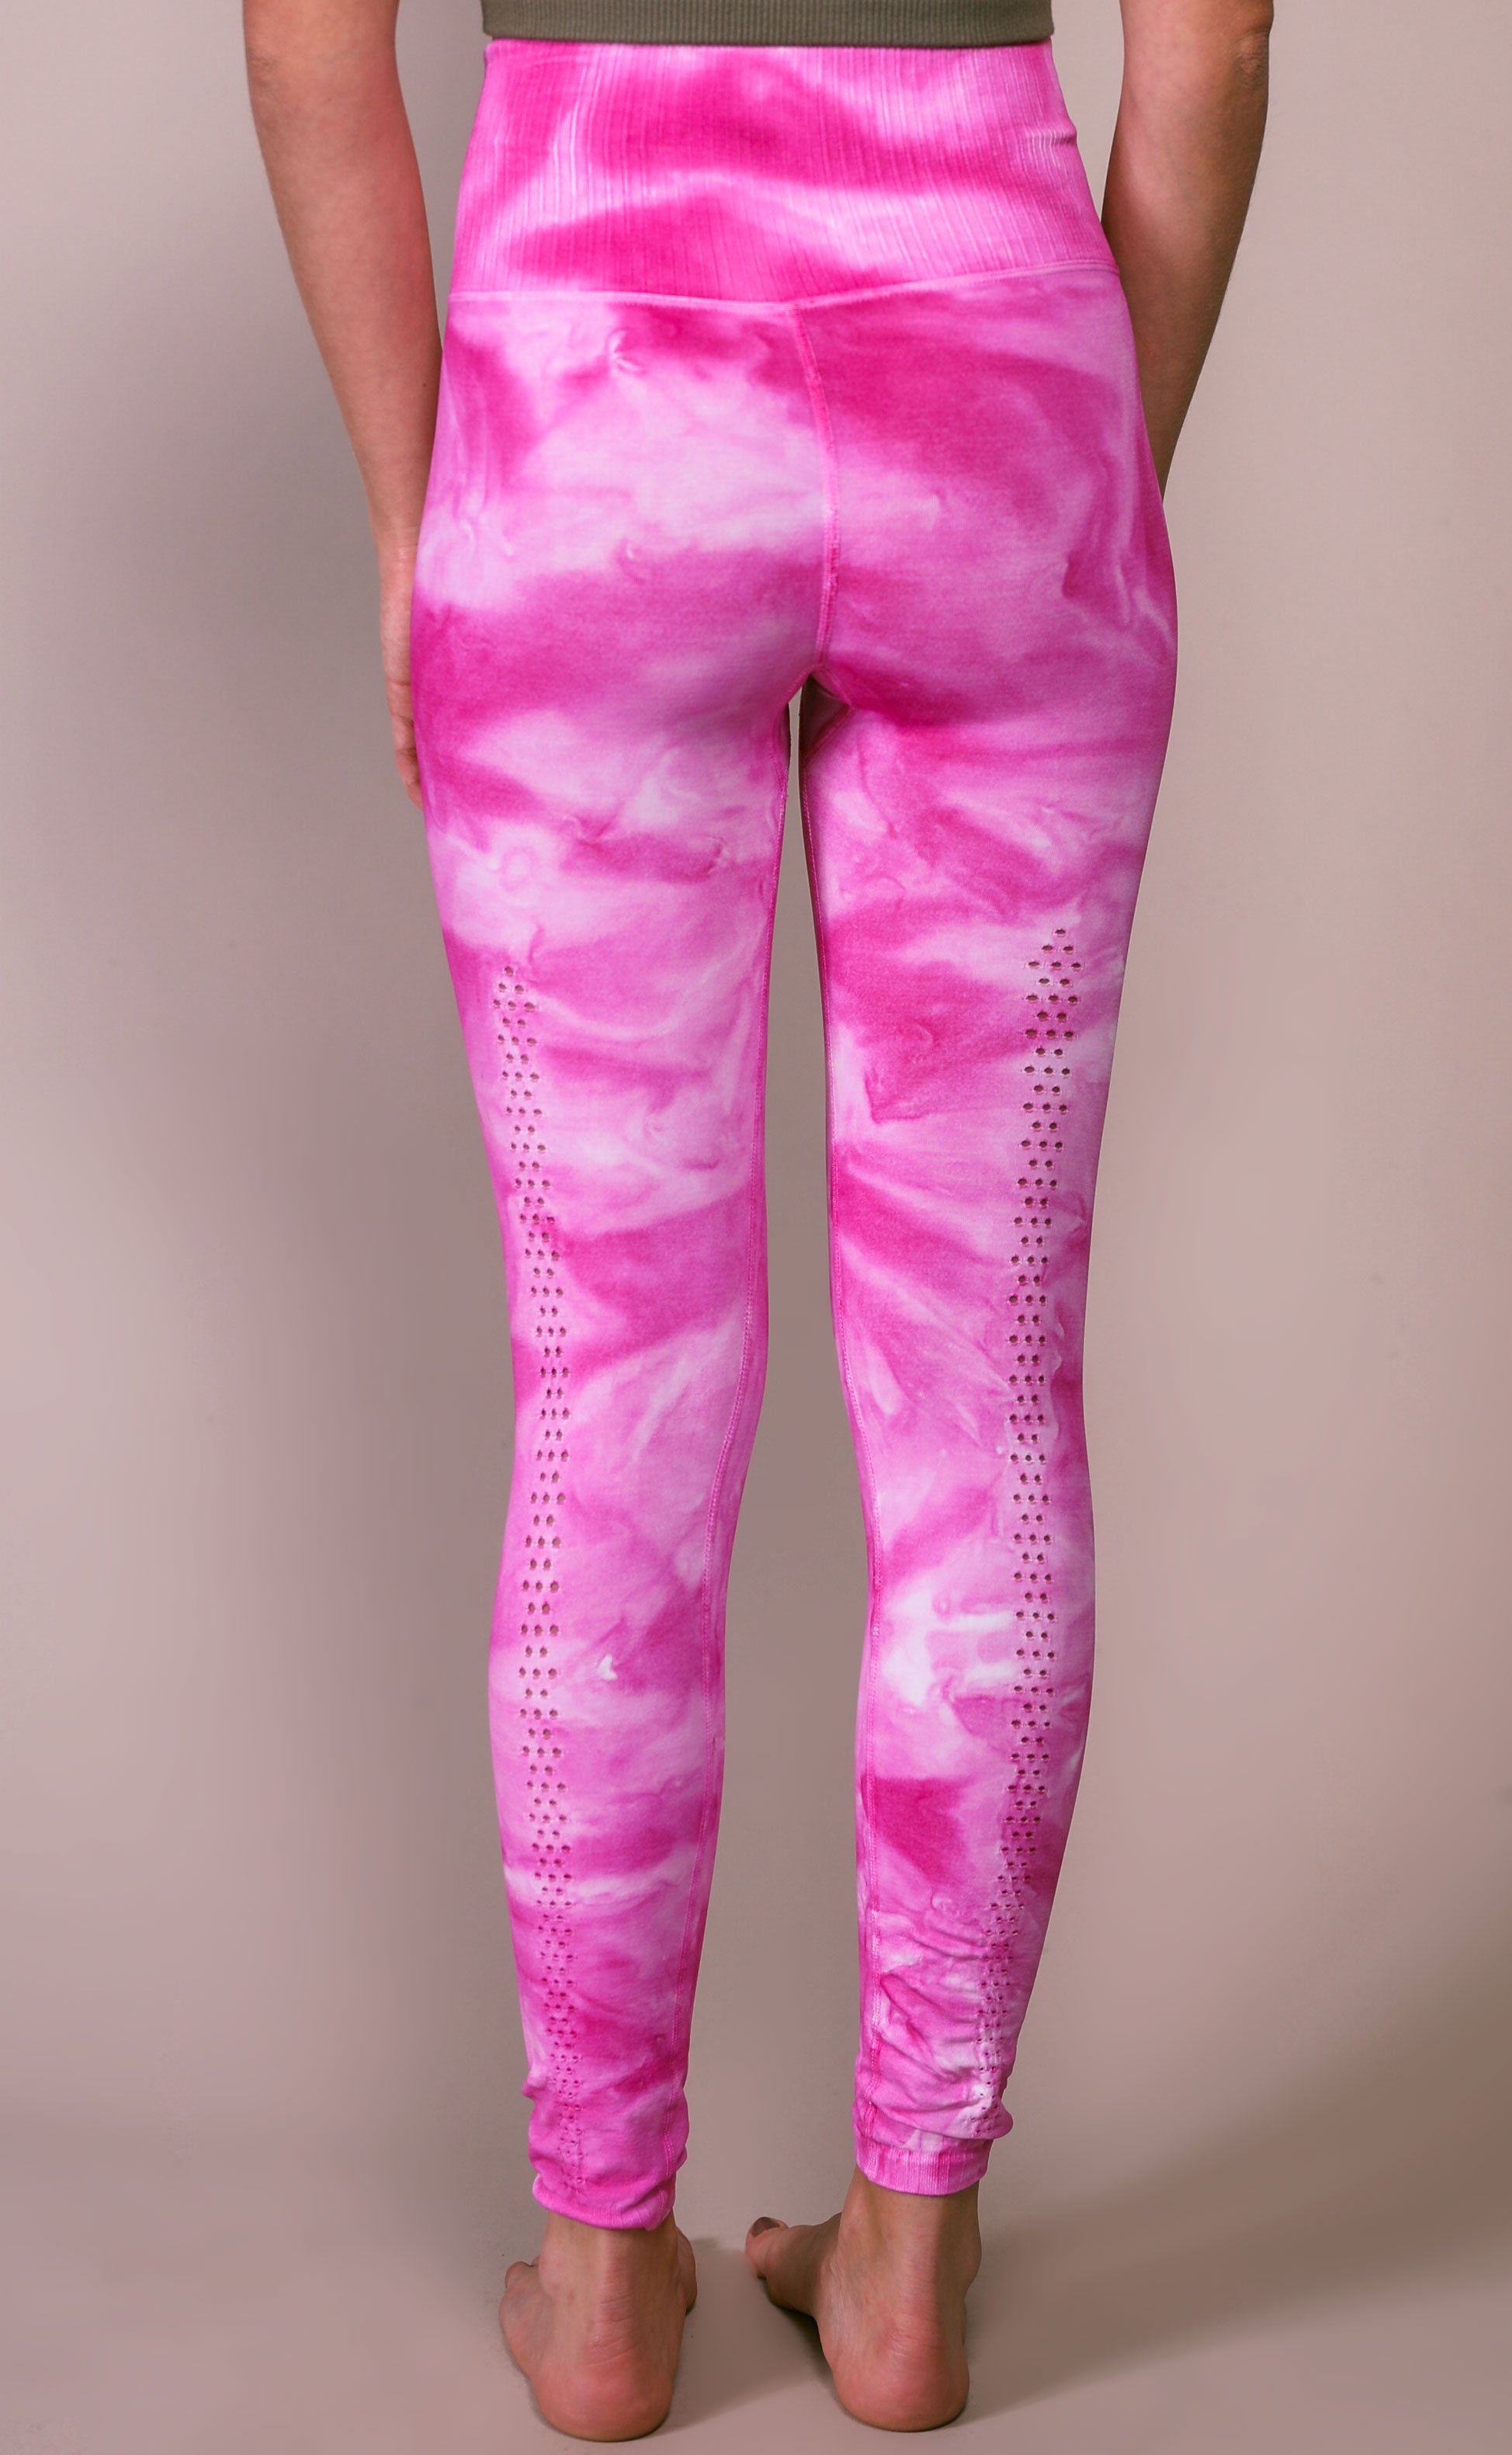 Girls Size Large 10-12 Hot Pink Tie Dye Cotton Leggings Fits Aged 10 12 Old  Navy Brand Hand Tie-dyed 